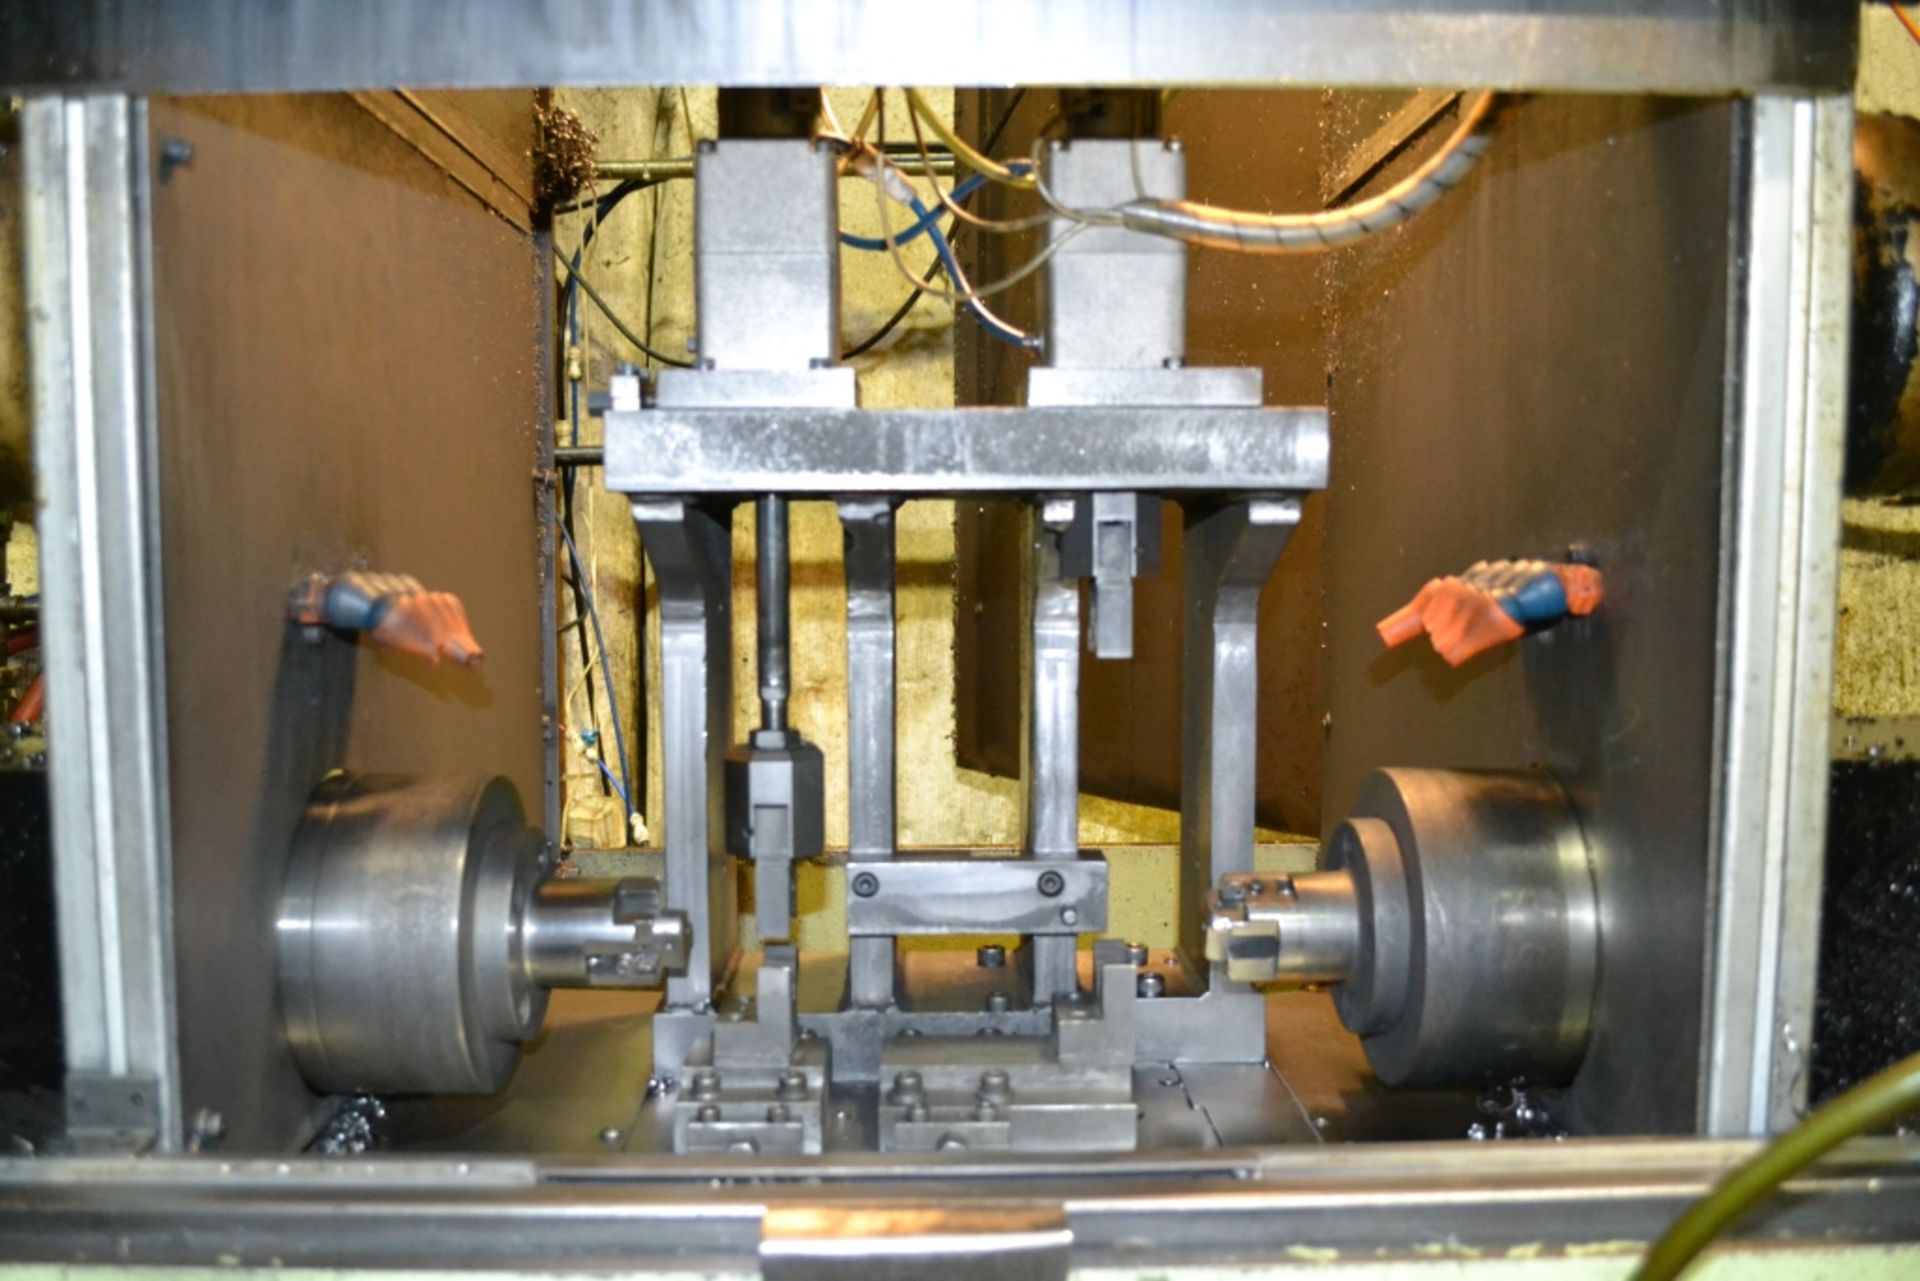 Yamada Model Double End Opposed Spindle Boring and Facing Machine, Central Clamping Fixture, w/PLC - Image 2 of 3